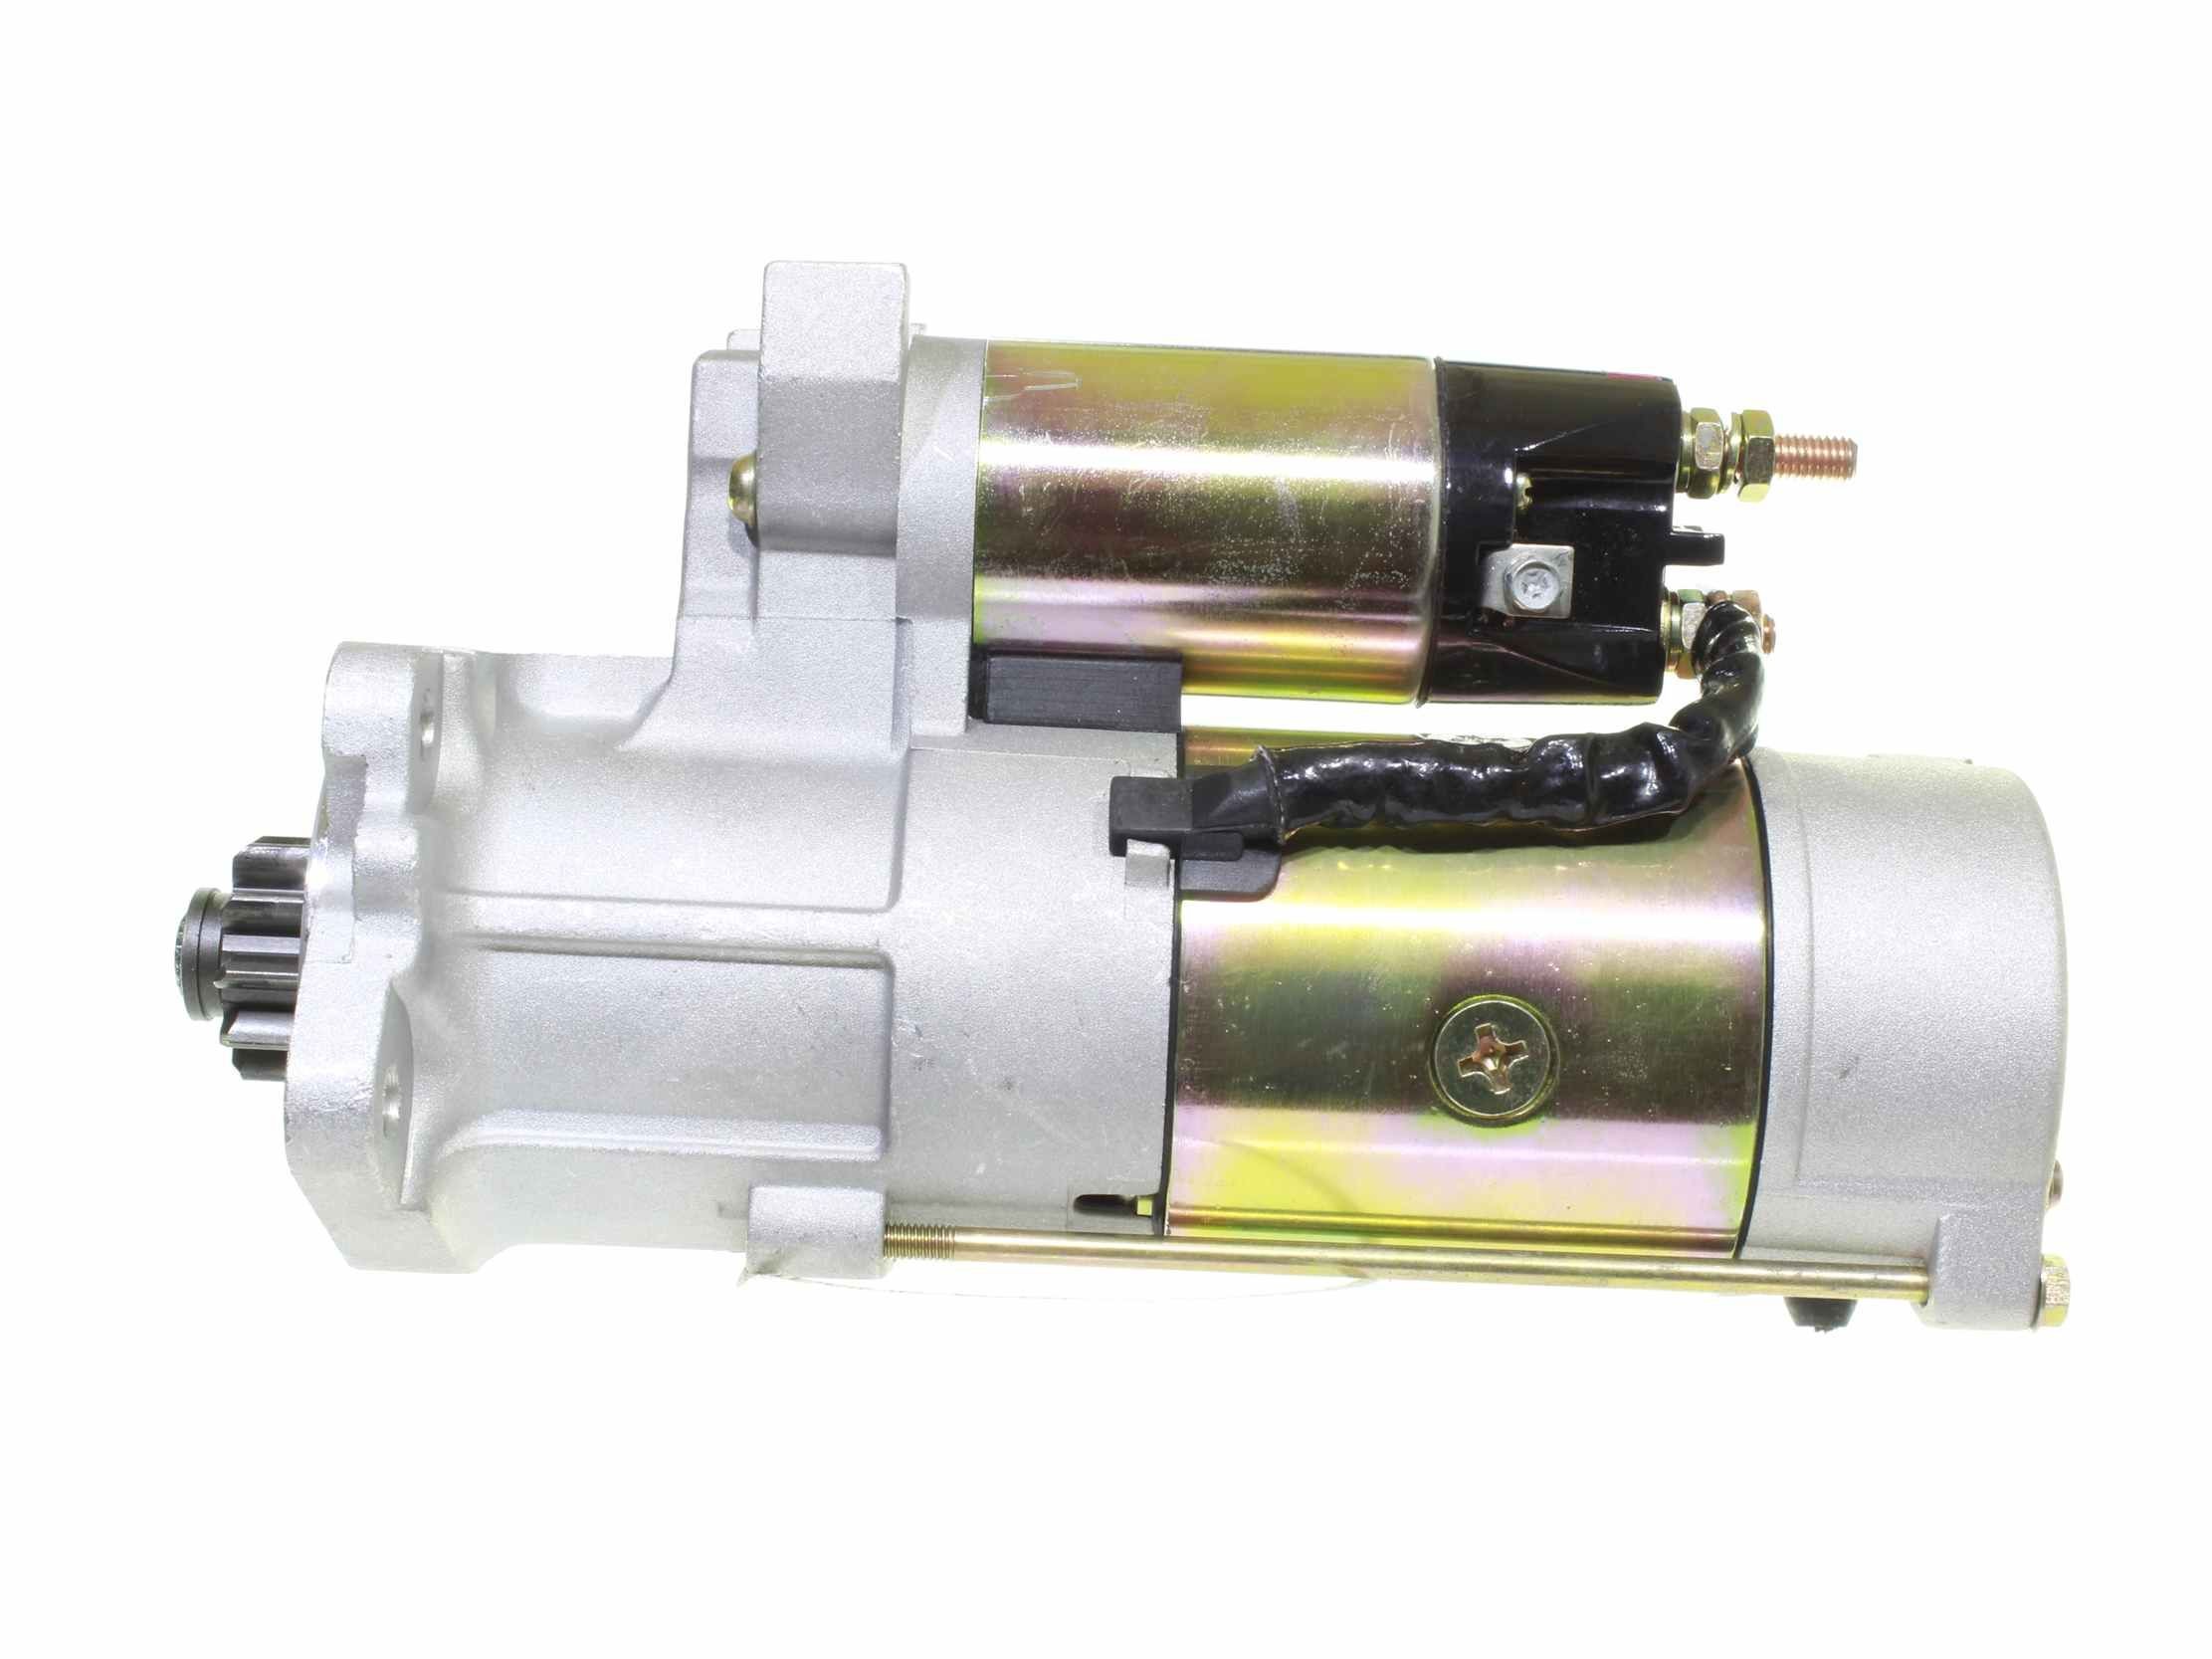 10439854 Engine starter motor ALANKO RNLM8T60871 review and test